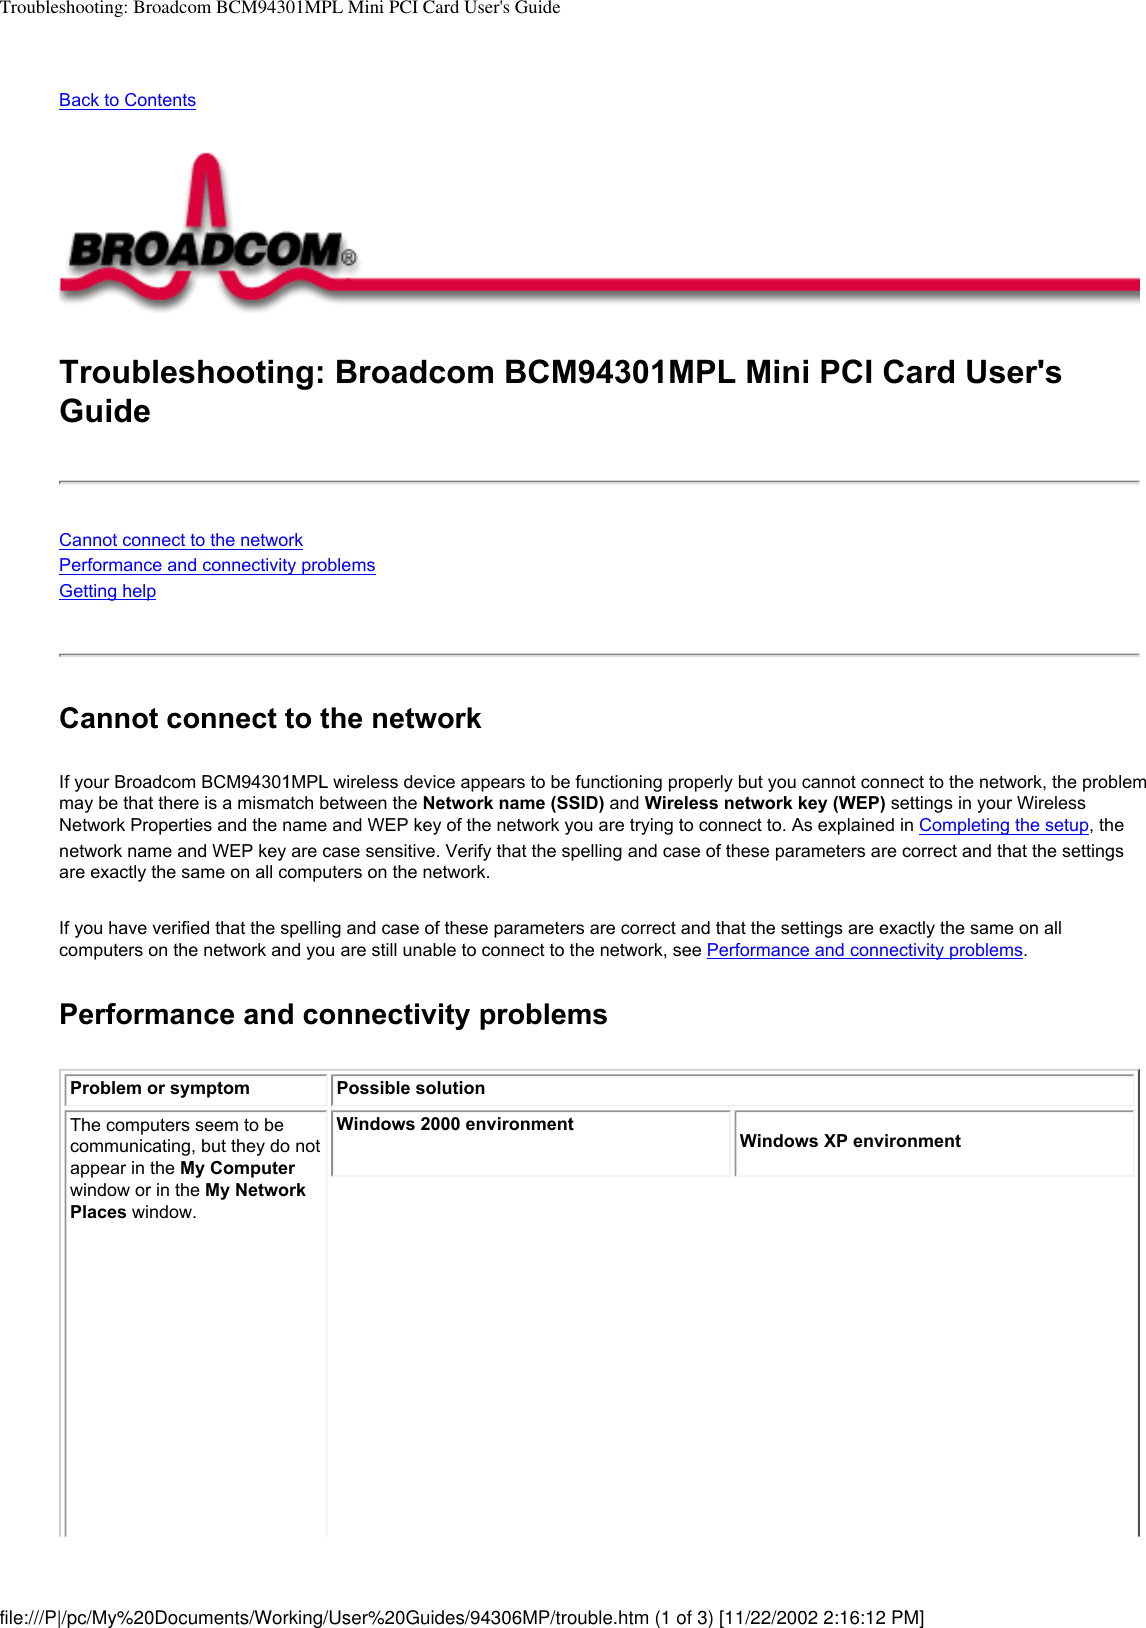 Troubleshooting: Broadcom BCM94301MPL Mini PCI Card User&apos;s GuideBack to Contents Troubleshooting: Broadcom BCM94301MPL Mini PCI Card User&apos;s GuideCannot connect to the networkPerformance and connectivity problemsGetting helpCannot connect to the networkIf your Broadcom BCM94301MPL wireless device appears to be functioning properly but you cannot connect to the network, the problem may be that there is a mismatch between the Network name (SSID) and Wireless network key (WEP) settings in your Wireless Network Properties and the name and WEP key of the network you are trying to connect to. As explained in Completing the setup, the network name and WEP key are case sensitive. Verify that the spelling and case of these parameters are correct and that the settings are exactly the same on all computers on the network.If you have verified that the spelling and case of these parameters are correct and that the settings are exactly the same on all computers on the network and you are still unable to connect to the network, see Performance and connectivity problems. Performance and connectivity problemsProblem or symptom Possible solutionThe computers seem to be communicating, but they do not appear in the My Computer window or in the My Network Places window.Windows 2000 environmentWindows XP environmentfile:///P|/pc/My%20Documents/Working/User%20Guides/94306MP/trouble.htm (1 of 3) [11/22/2002 2:16:12 PM]